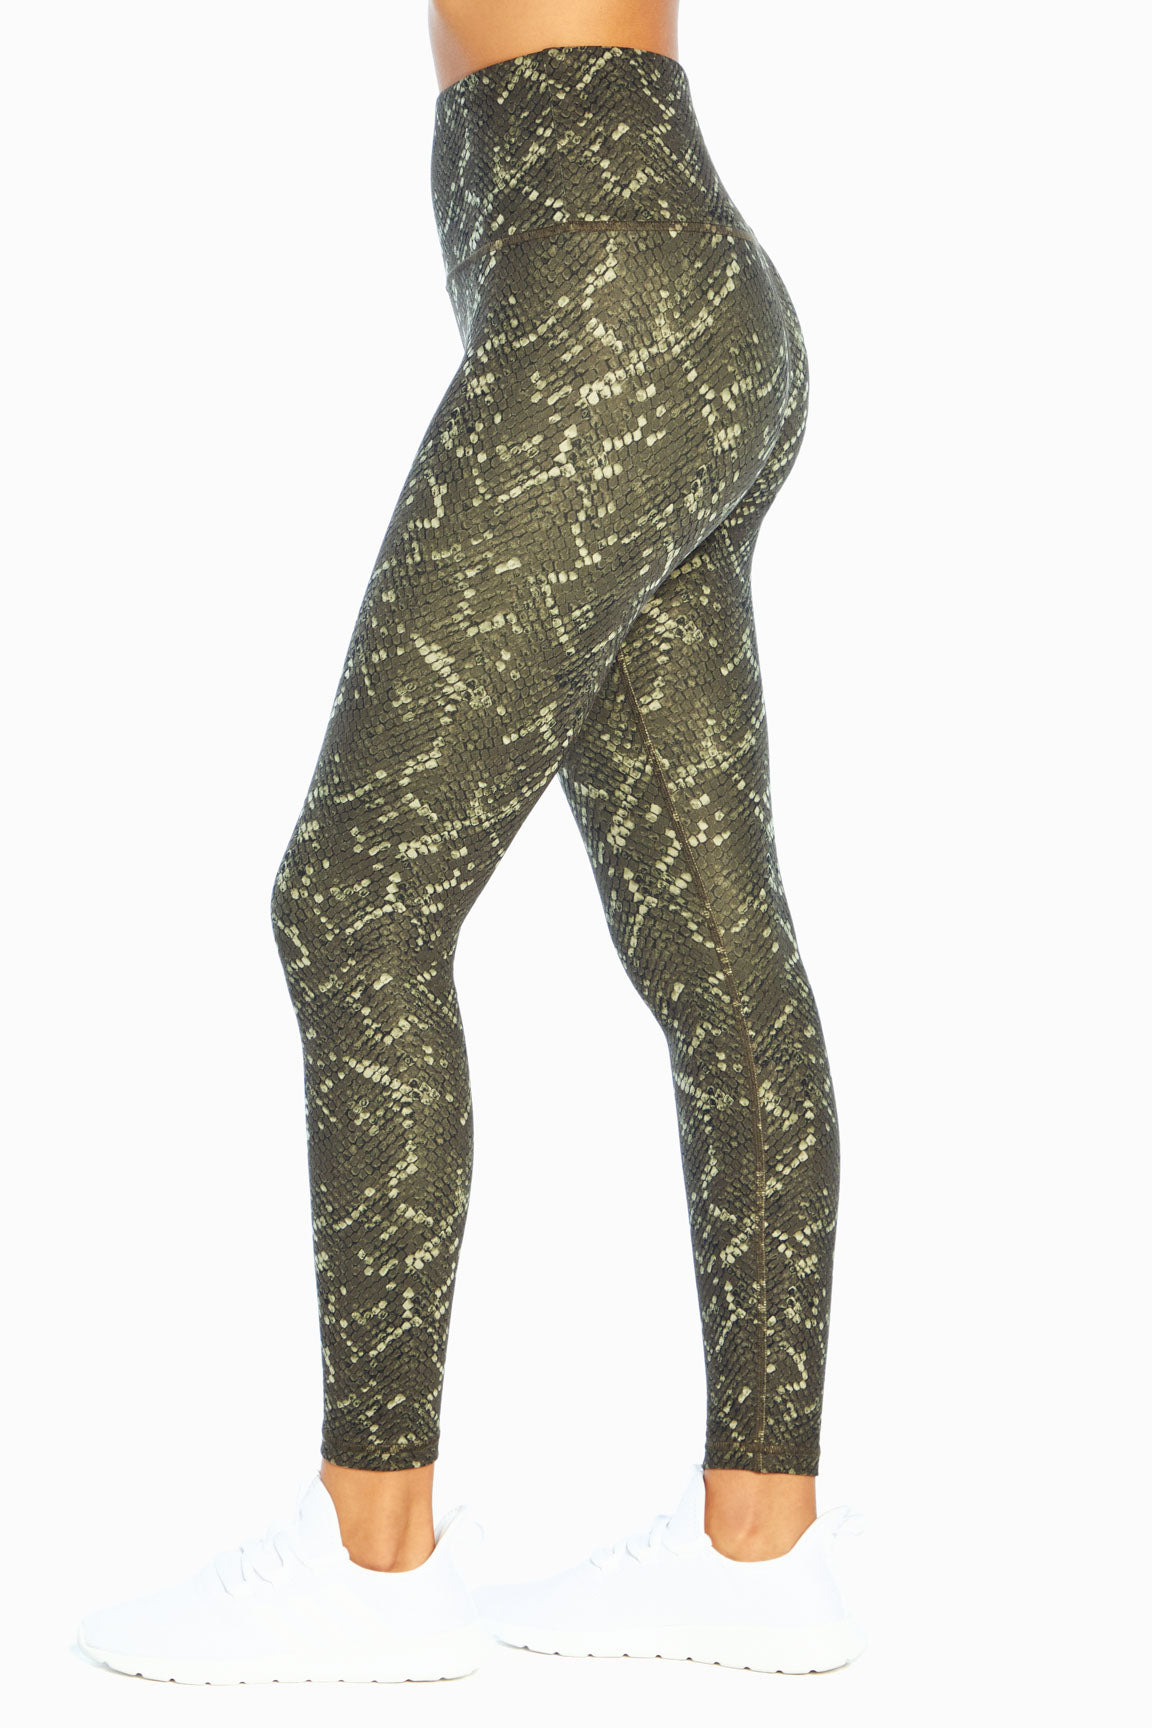 Balance Collection Womens Contender Luxe High Rise Long Legging